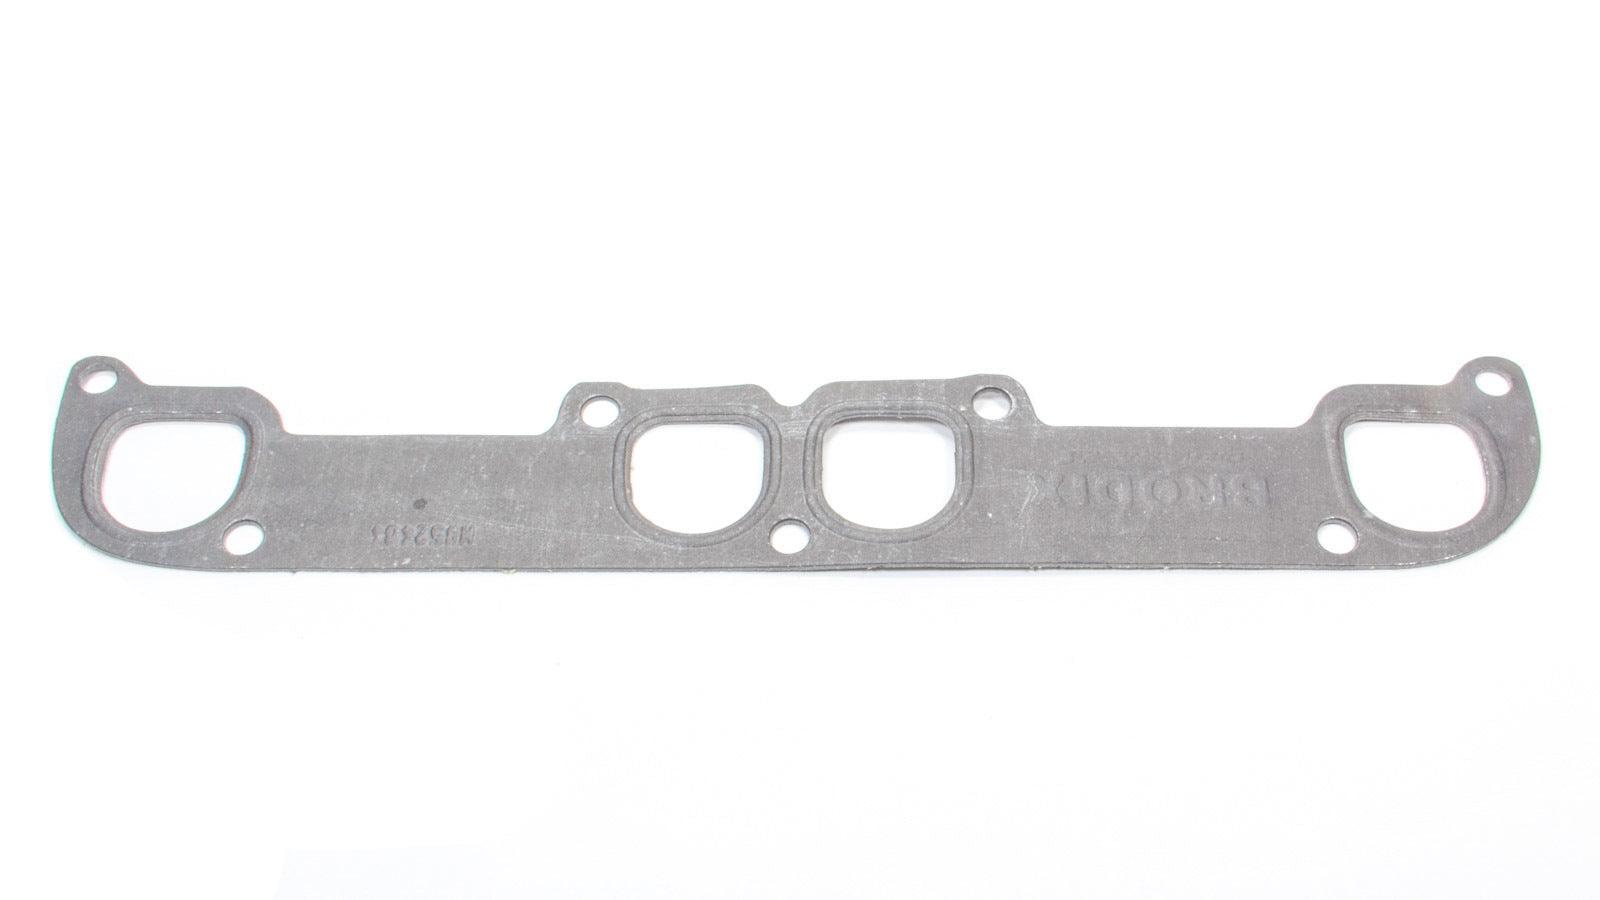 Exhaust Gasket - SBC Spread Port (Each) - Burlile Performance Products